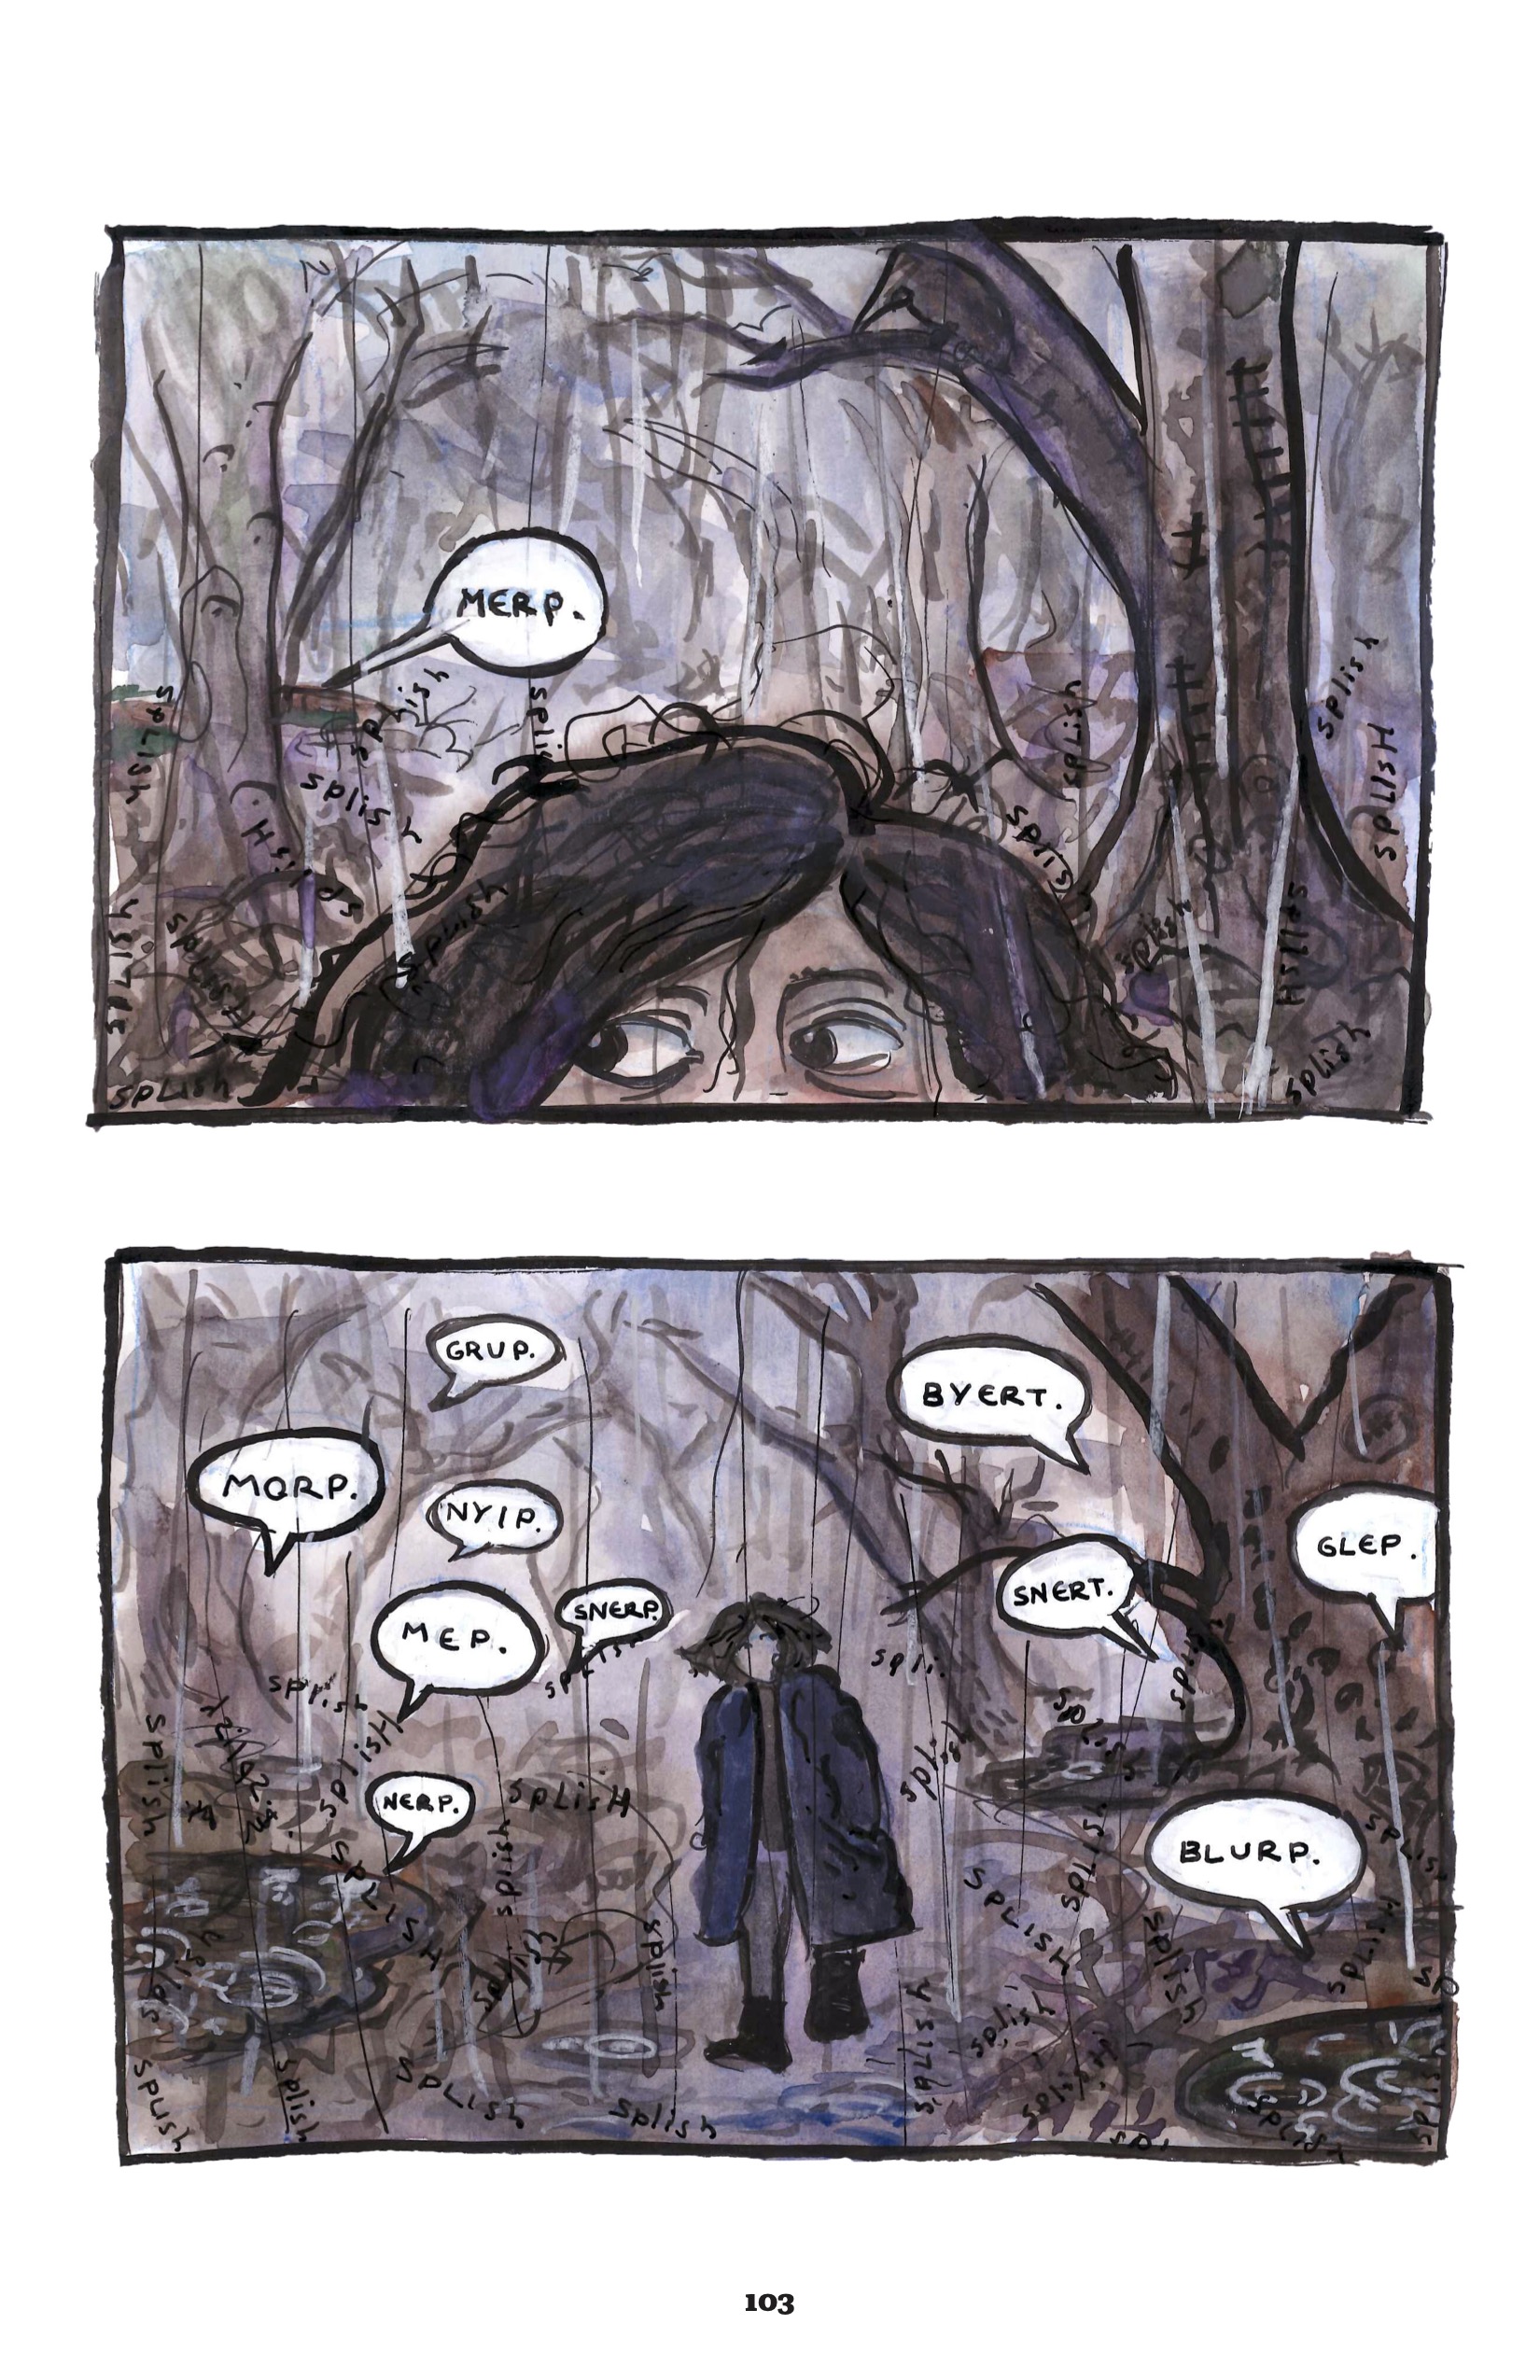 Same page layout as last

1. We zoom in on the top half of the figureâ€™s face, whose eyes are peering to the left of the page. The background still shows trees in a wooded area along with splish sounds. From the left of the panel comes an unidentified â€œMERP.â€
2. We zoom out on the figure again, who continues walking along the path (facing the reader). They are now surrounded by unidentified sounds in speech bubbles coming from all around the puddle-covered woods: â€œGRUP. MORP. NYIP. MEP. SNERP. NERP. BYERT. SNERT. GLEP. BLURP.â€